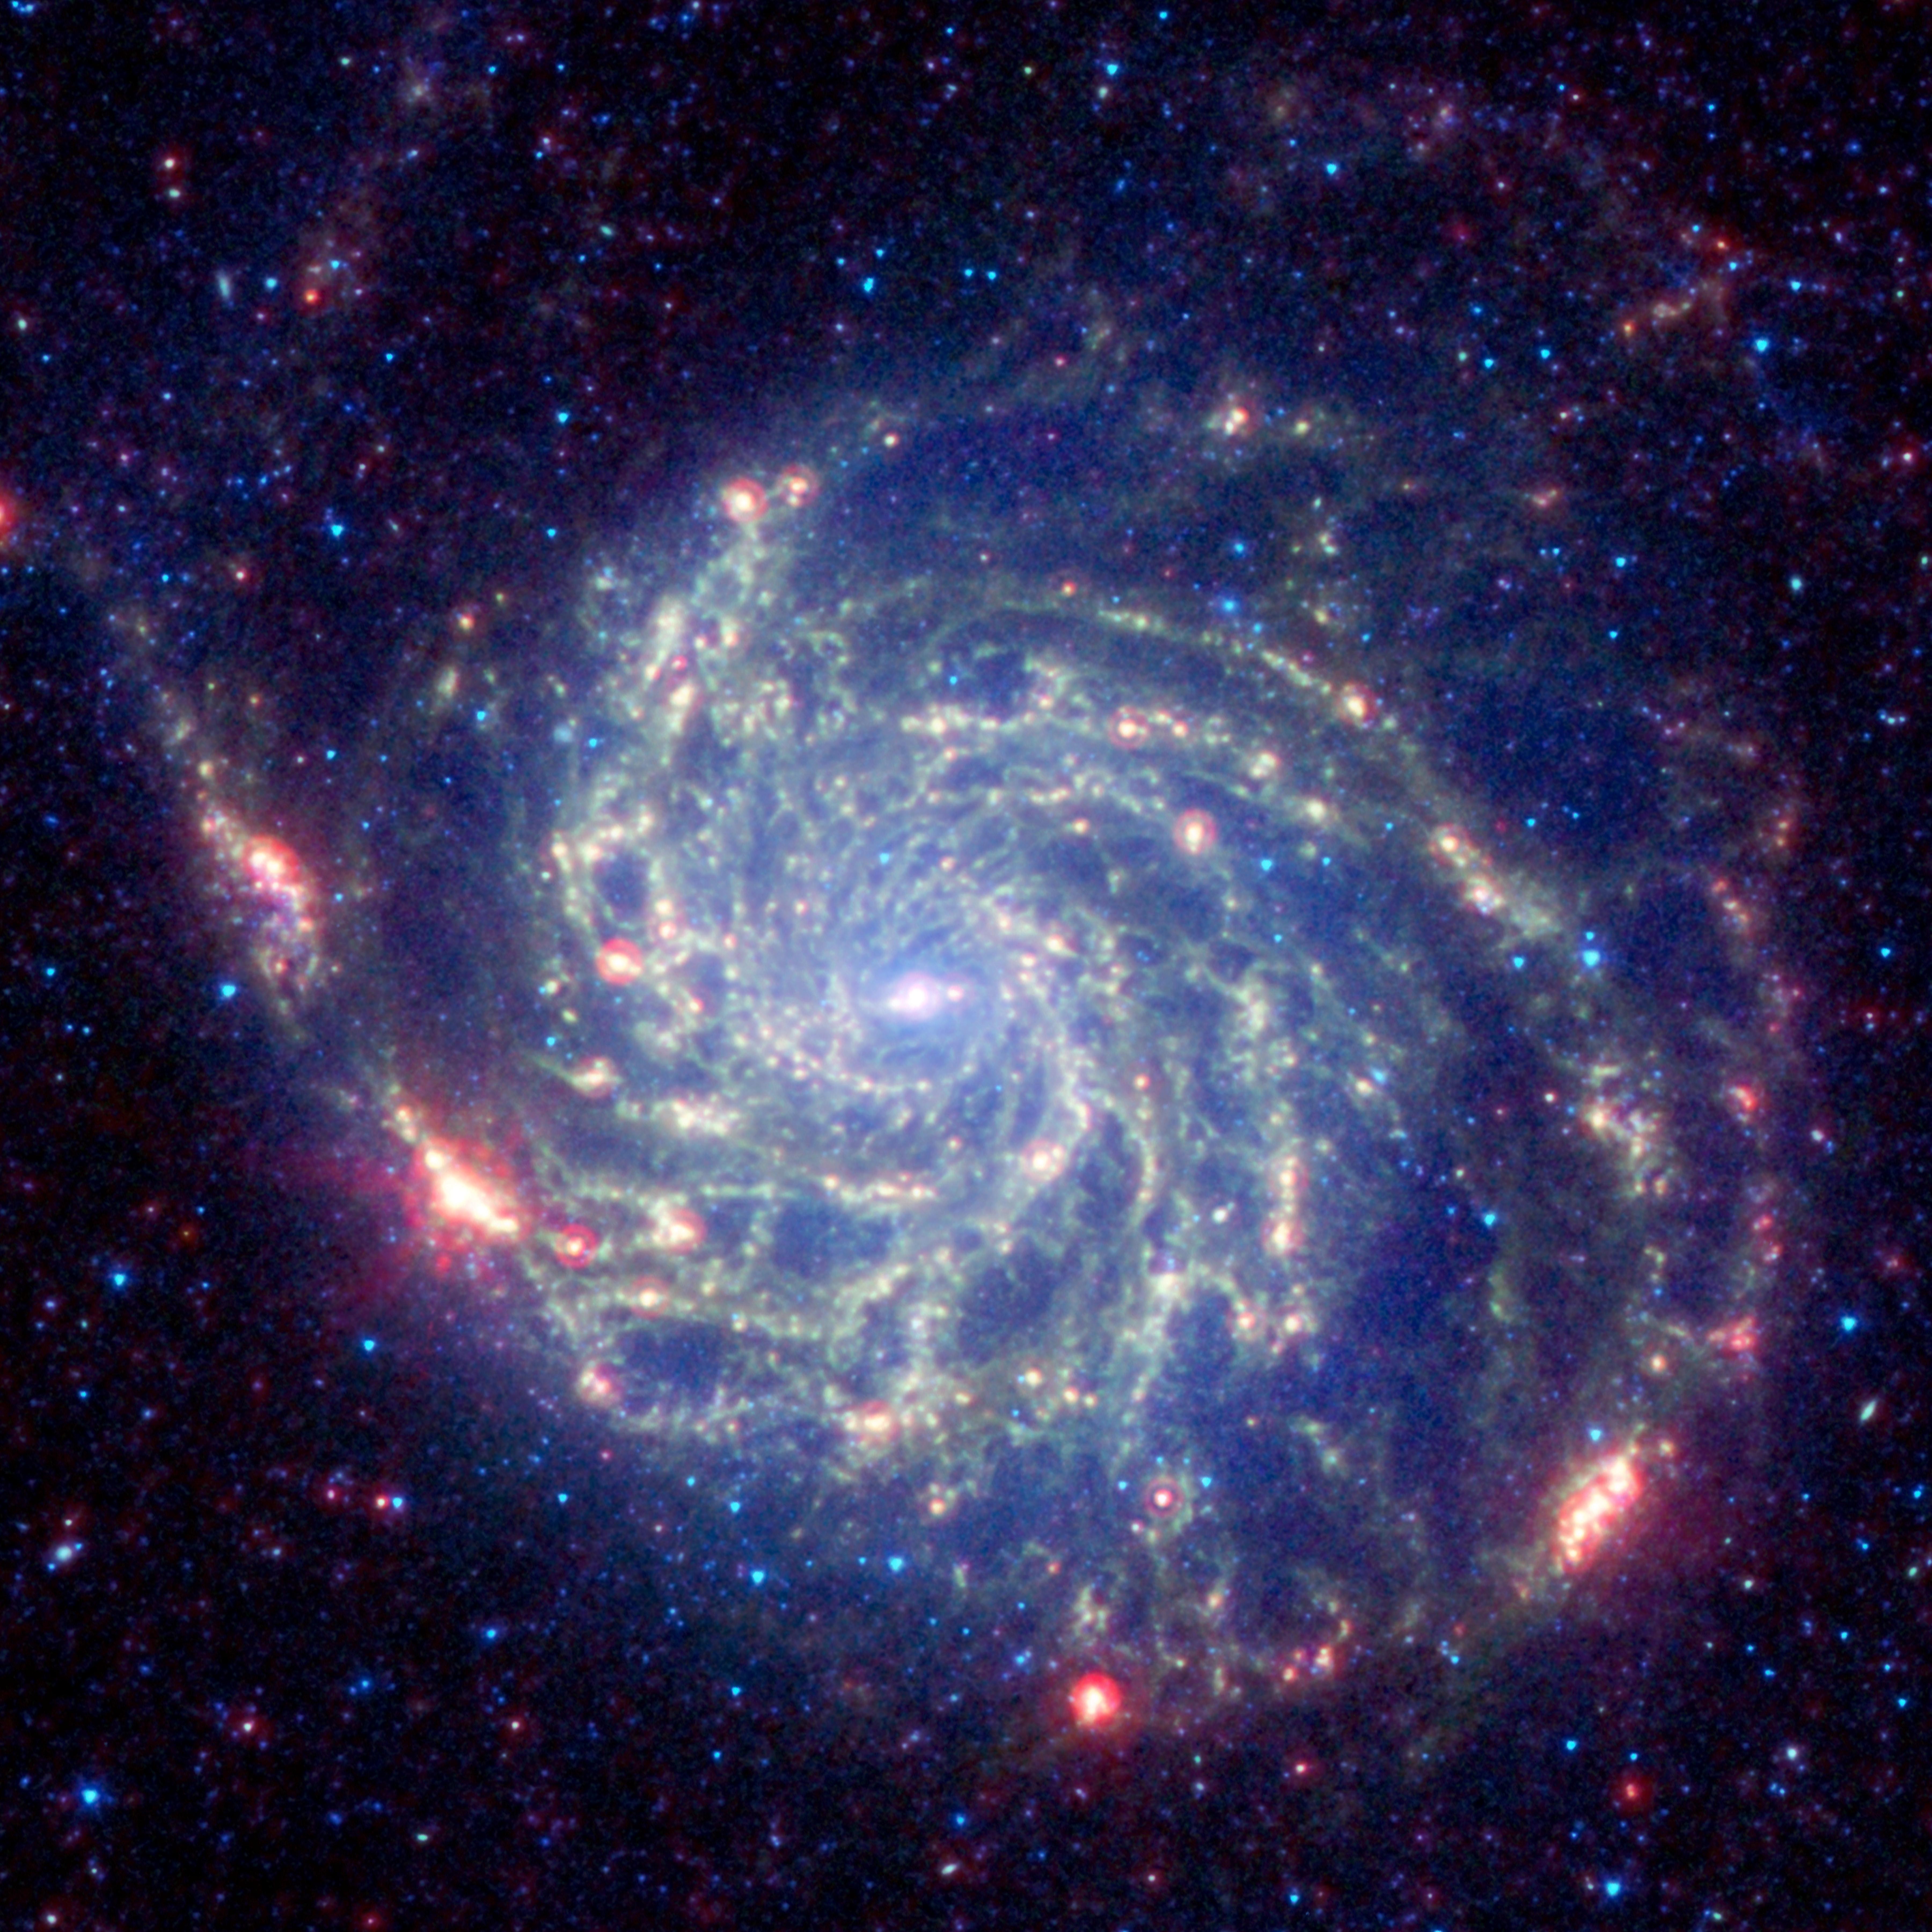 Space Image Spitzer Telescope S Of Galaxy Messier